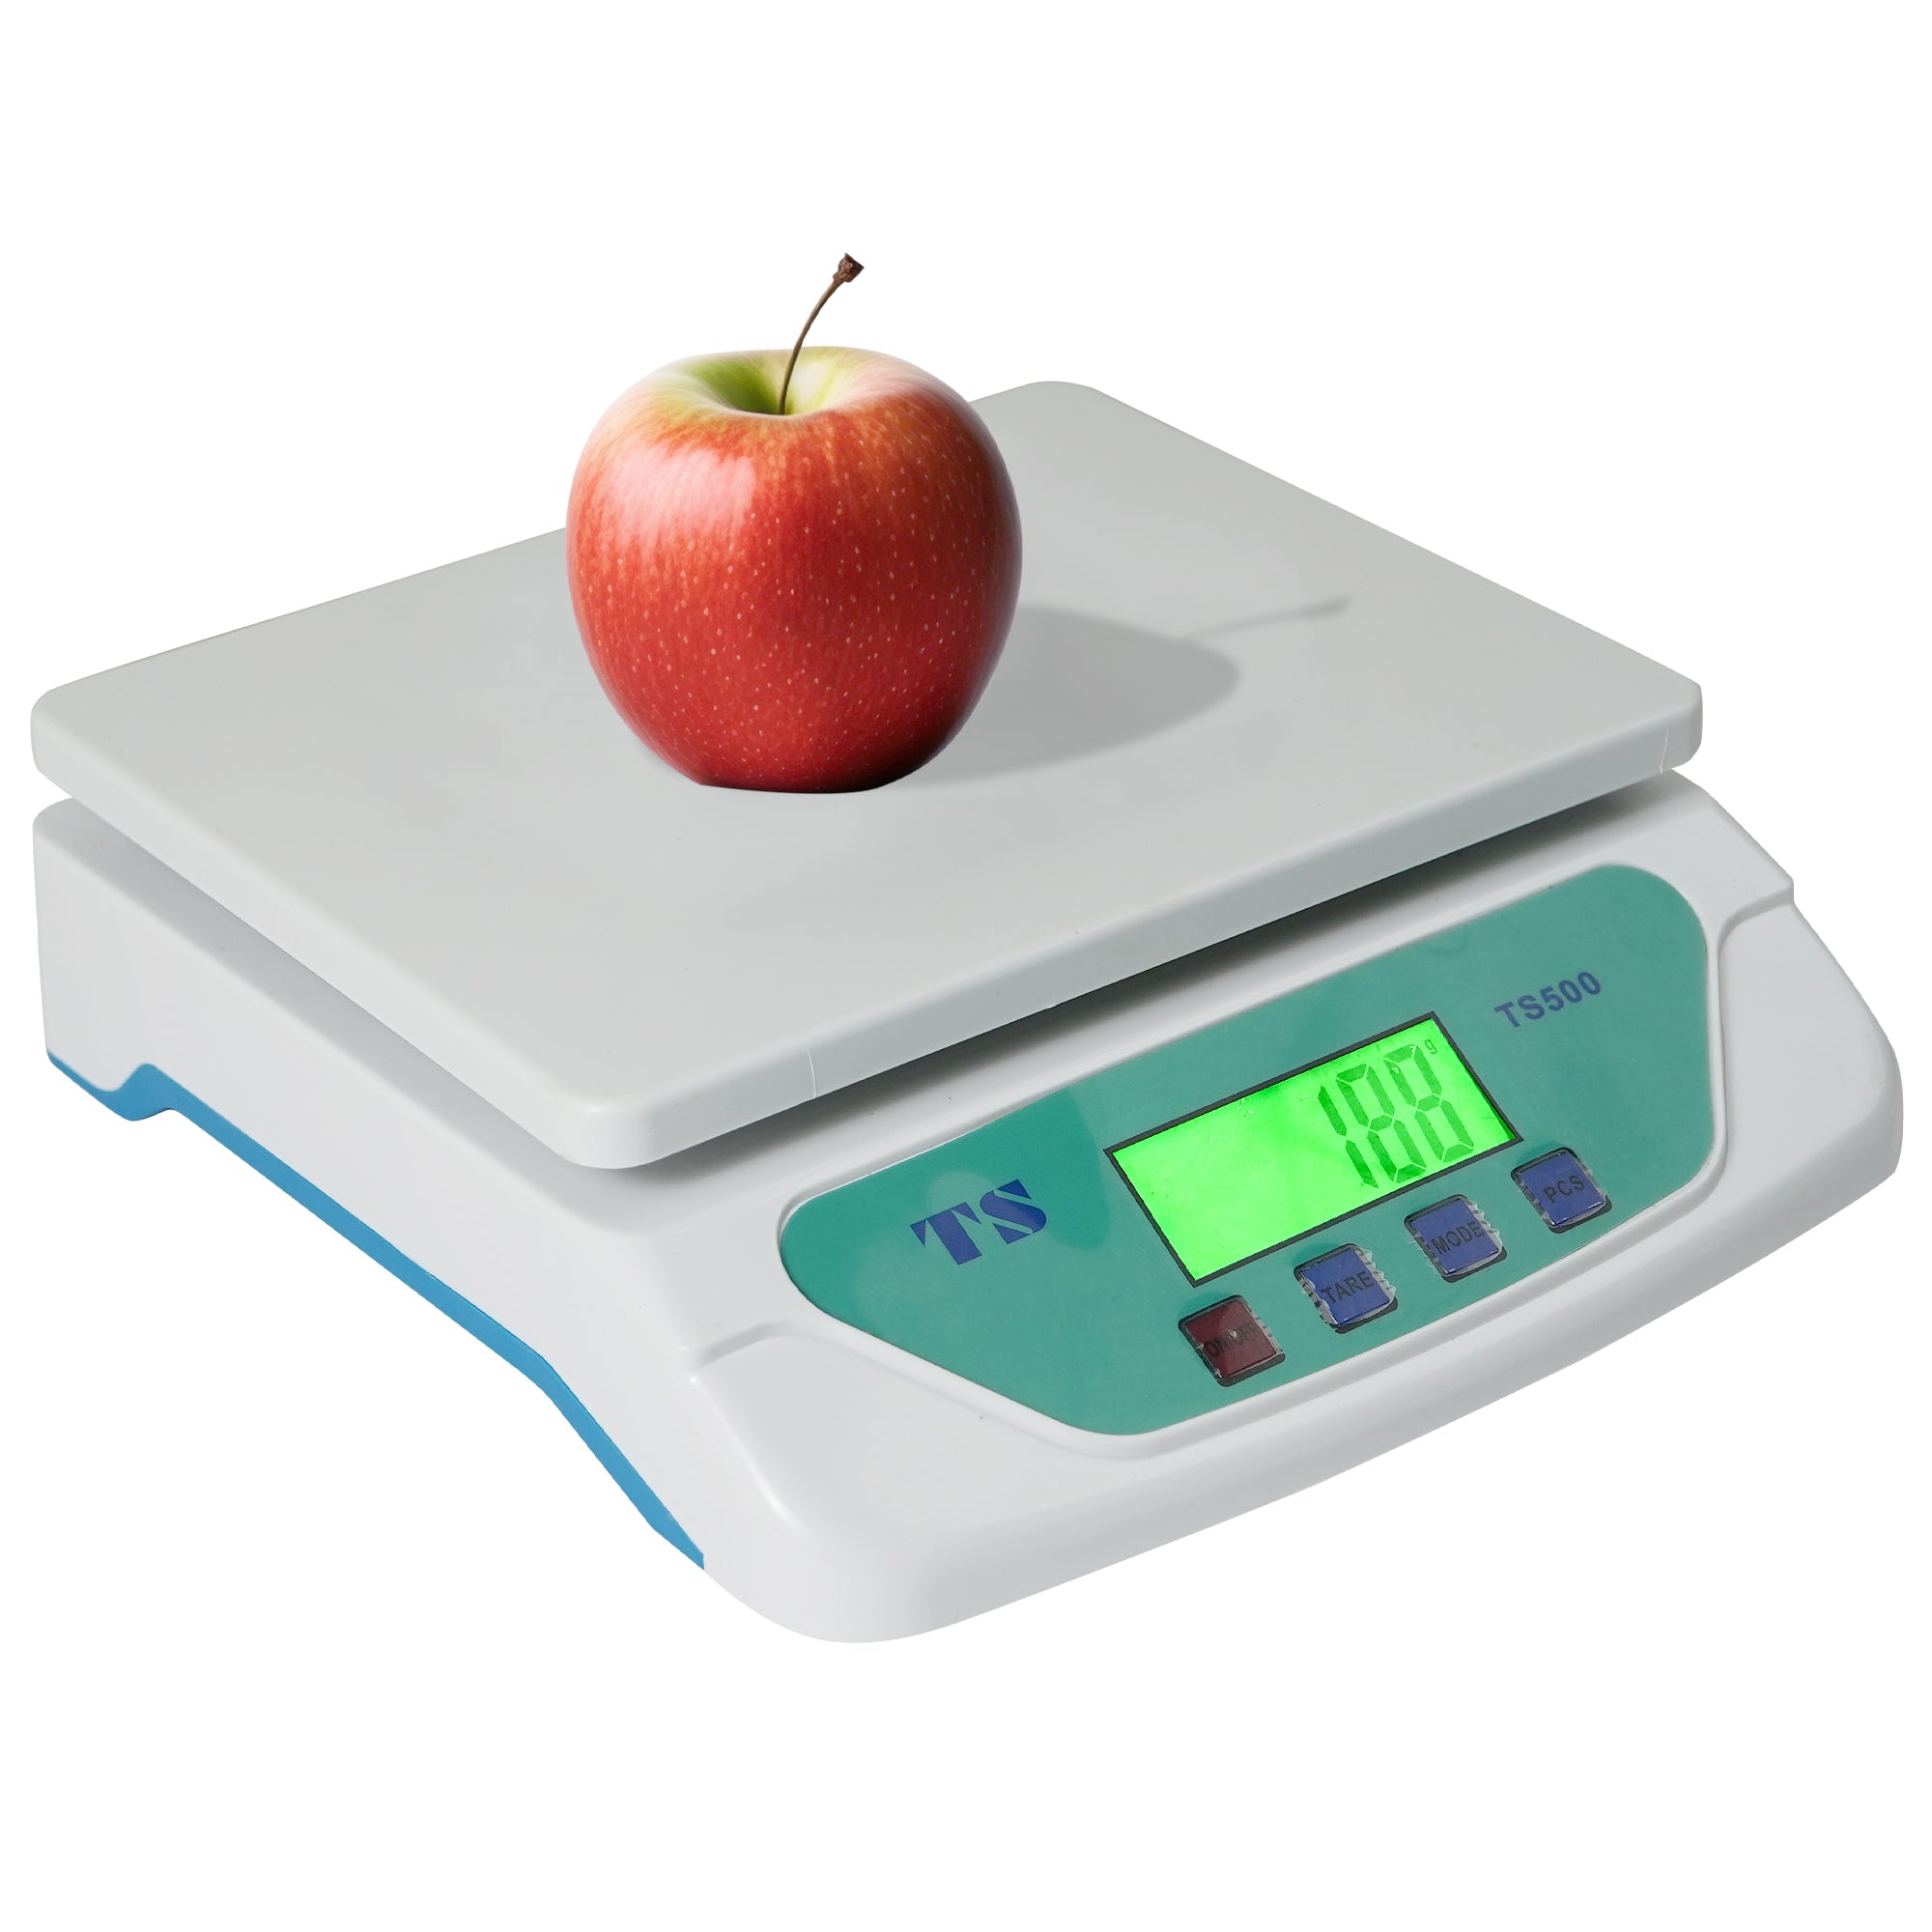 Manogyam Accurate and Reliable T.S 500 Weighing Scale: Perfect for Precise Measurements (30Kg)